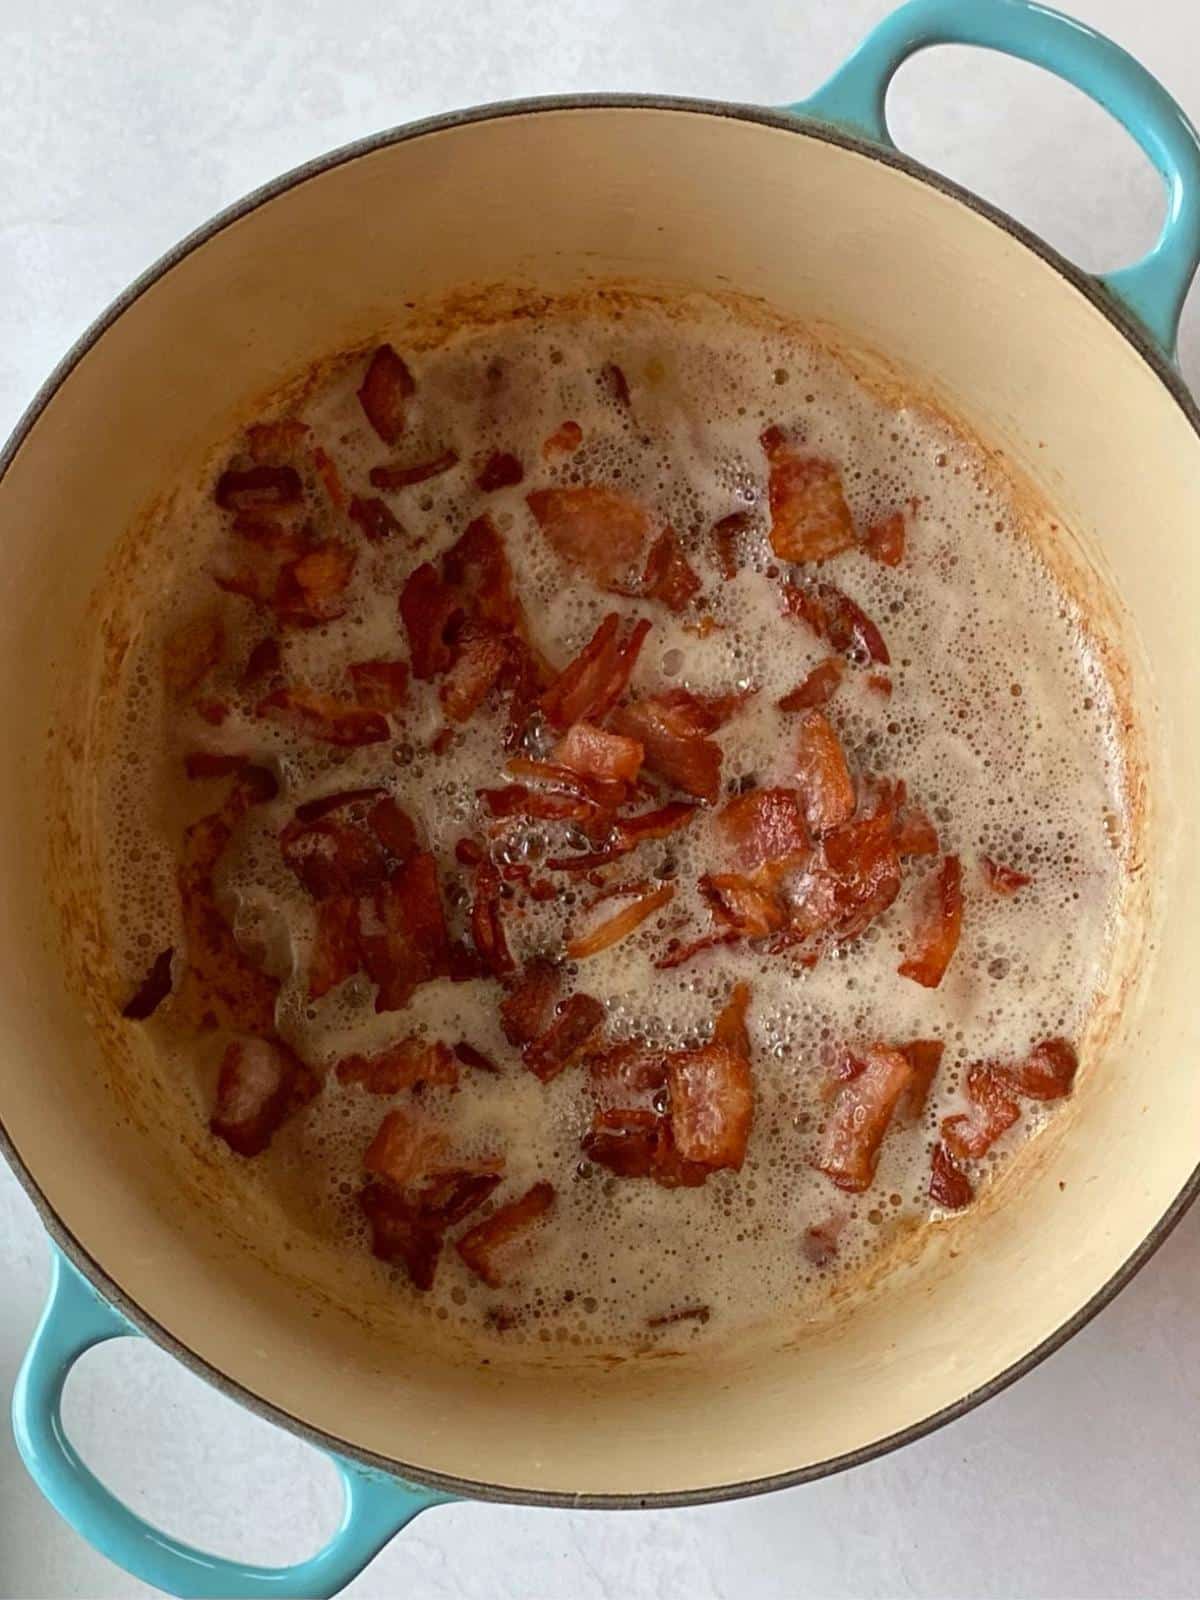 Browning bacon in a Dutch oven.